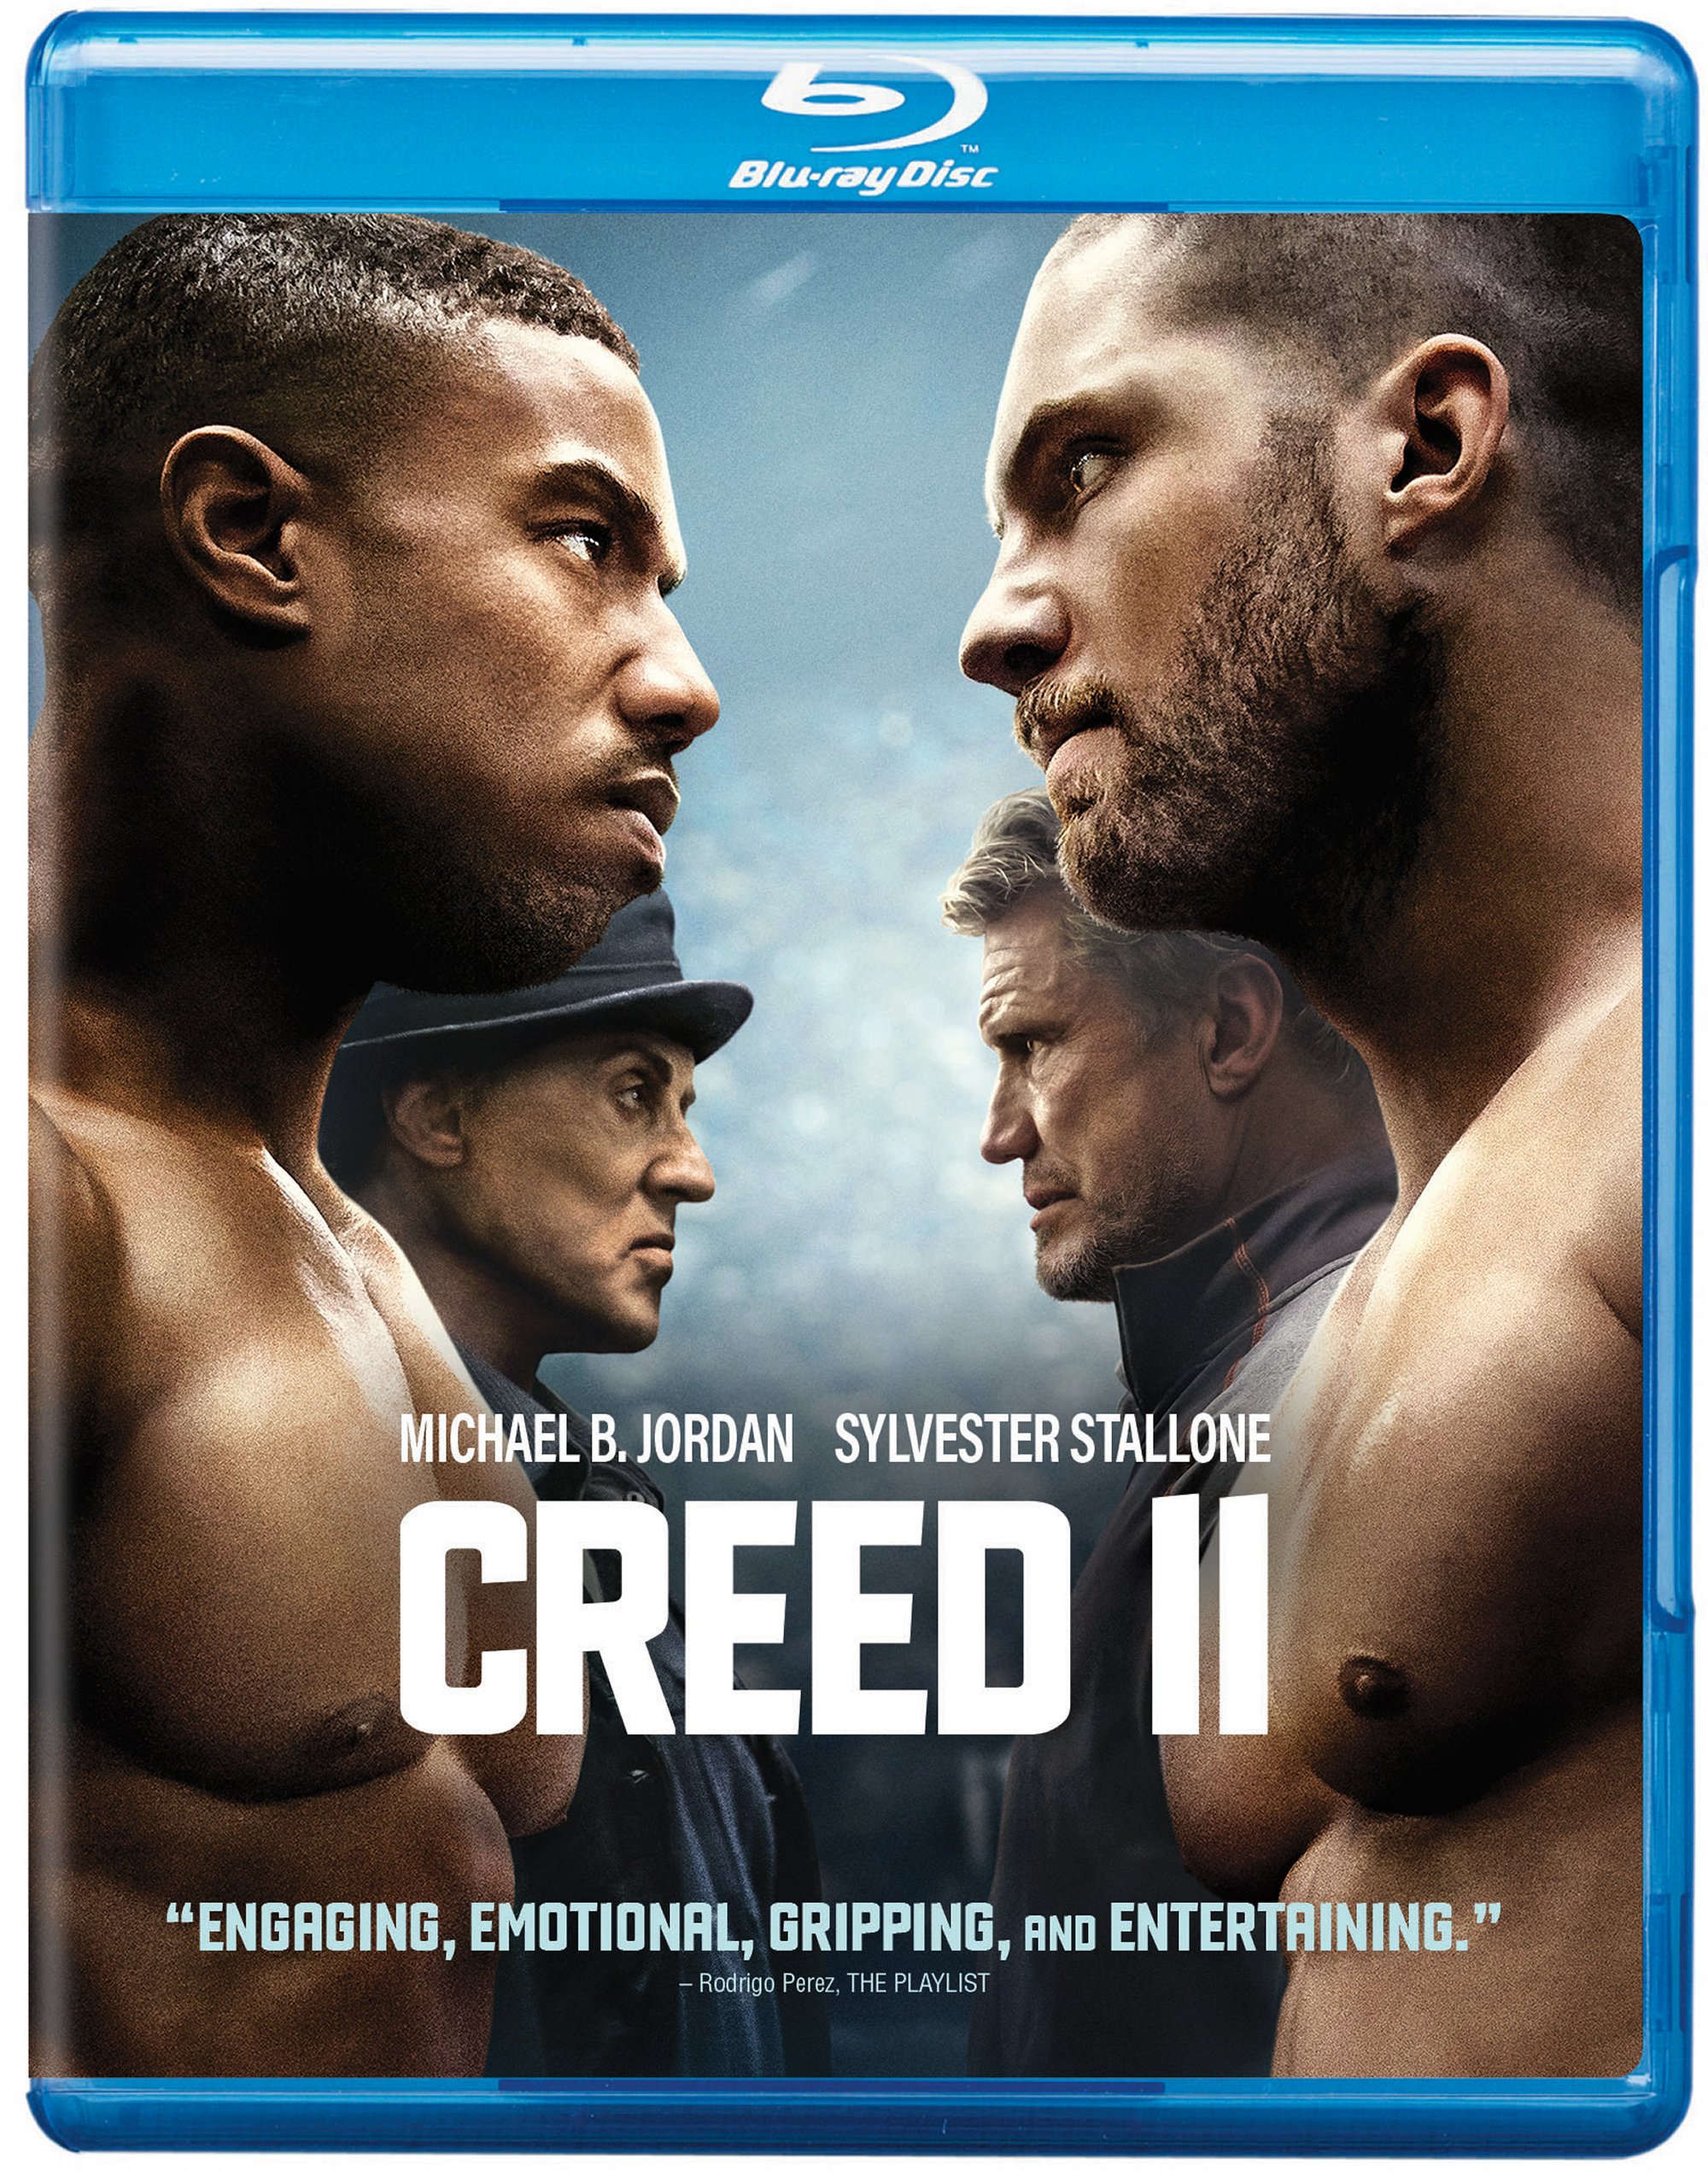 Creed II (Blu-ray), New Line Home Video, Action & Adventure - image 2 of 2